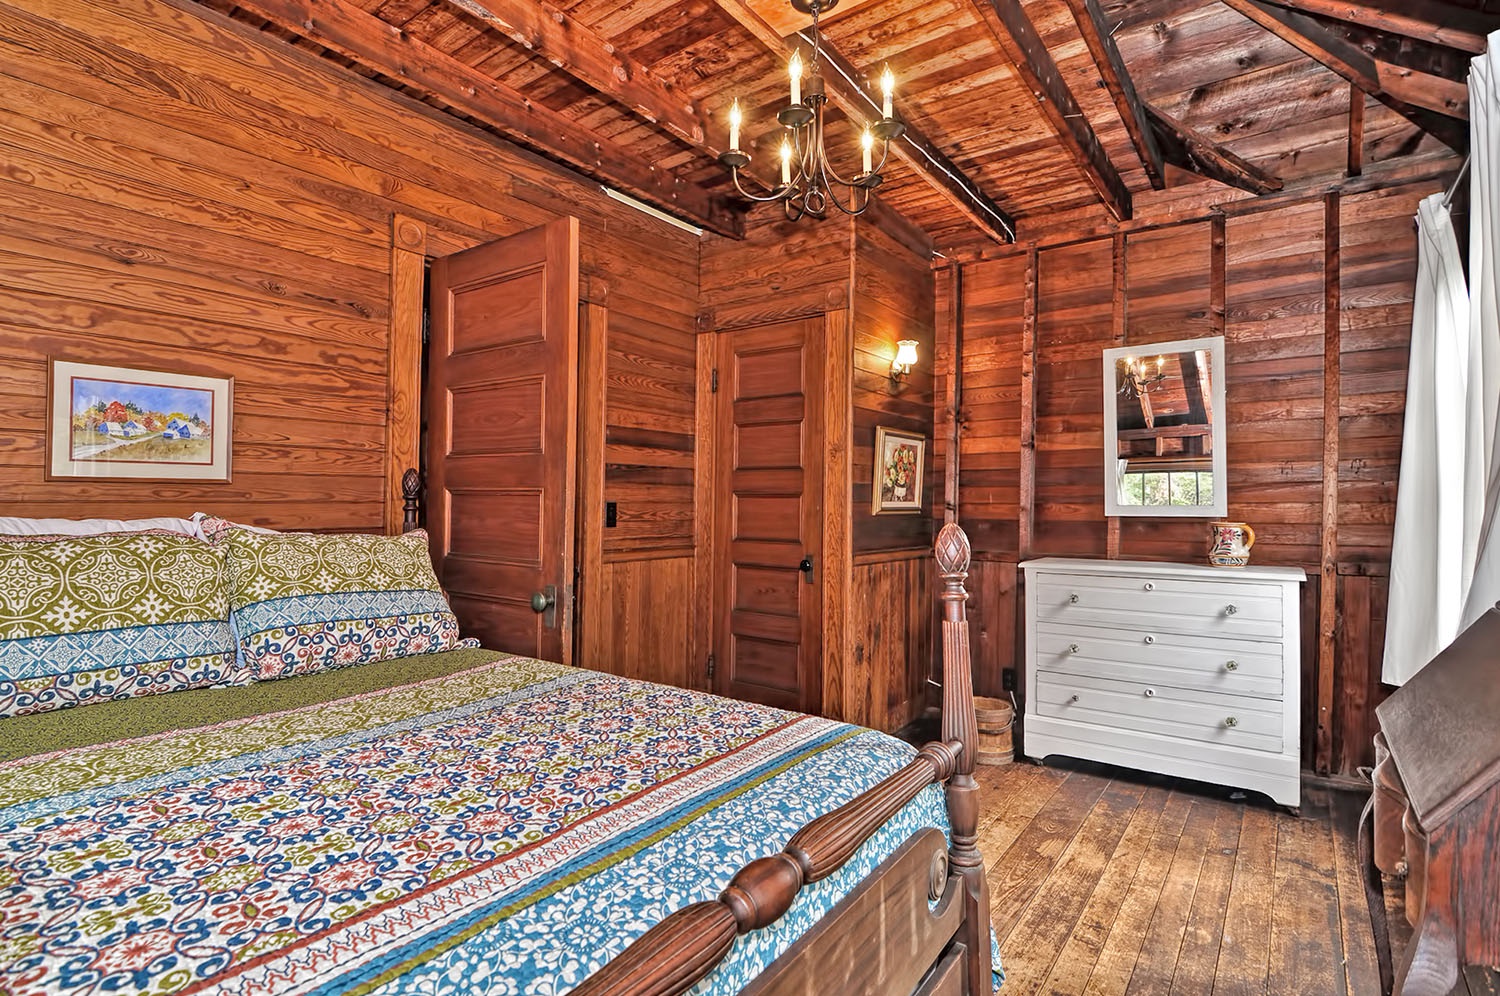 The Treehouse bedroom has a Queen bed.